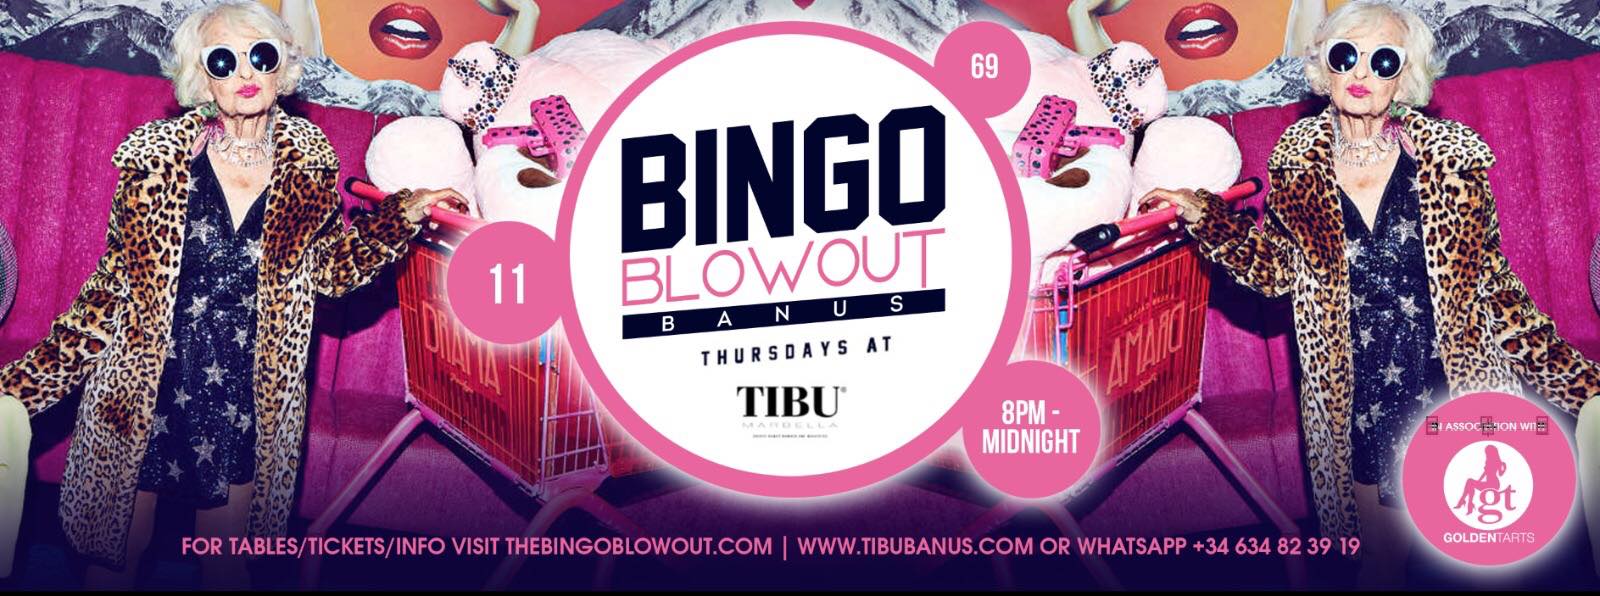 Bingo Blowout Event information and Tickets Fatsoma